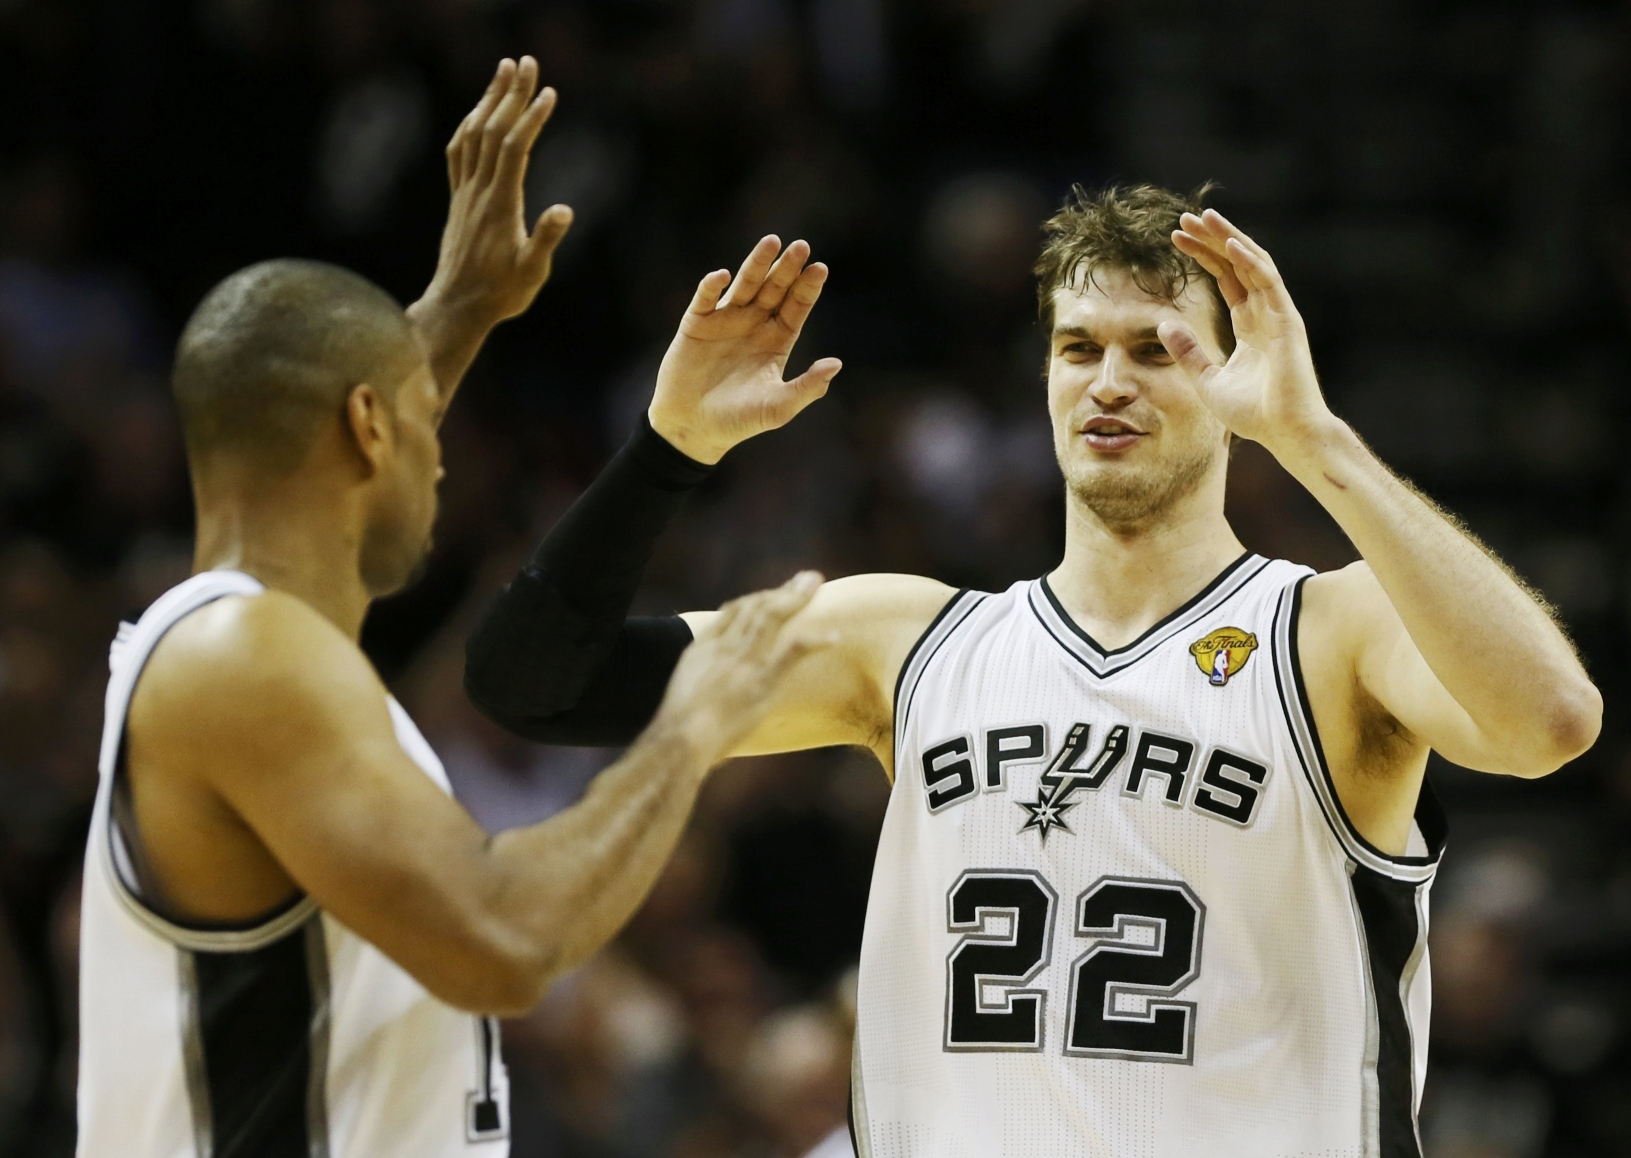 San Antonio Spurs' Tiago Splitter (right) celebrates with teammate Gary Neal against the Miami Heat in the third quarter during Game 3 of their NBA Finals basketball playoff in San Antonio, Texas. Photo: Reuters